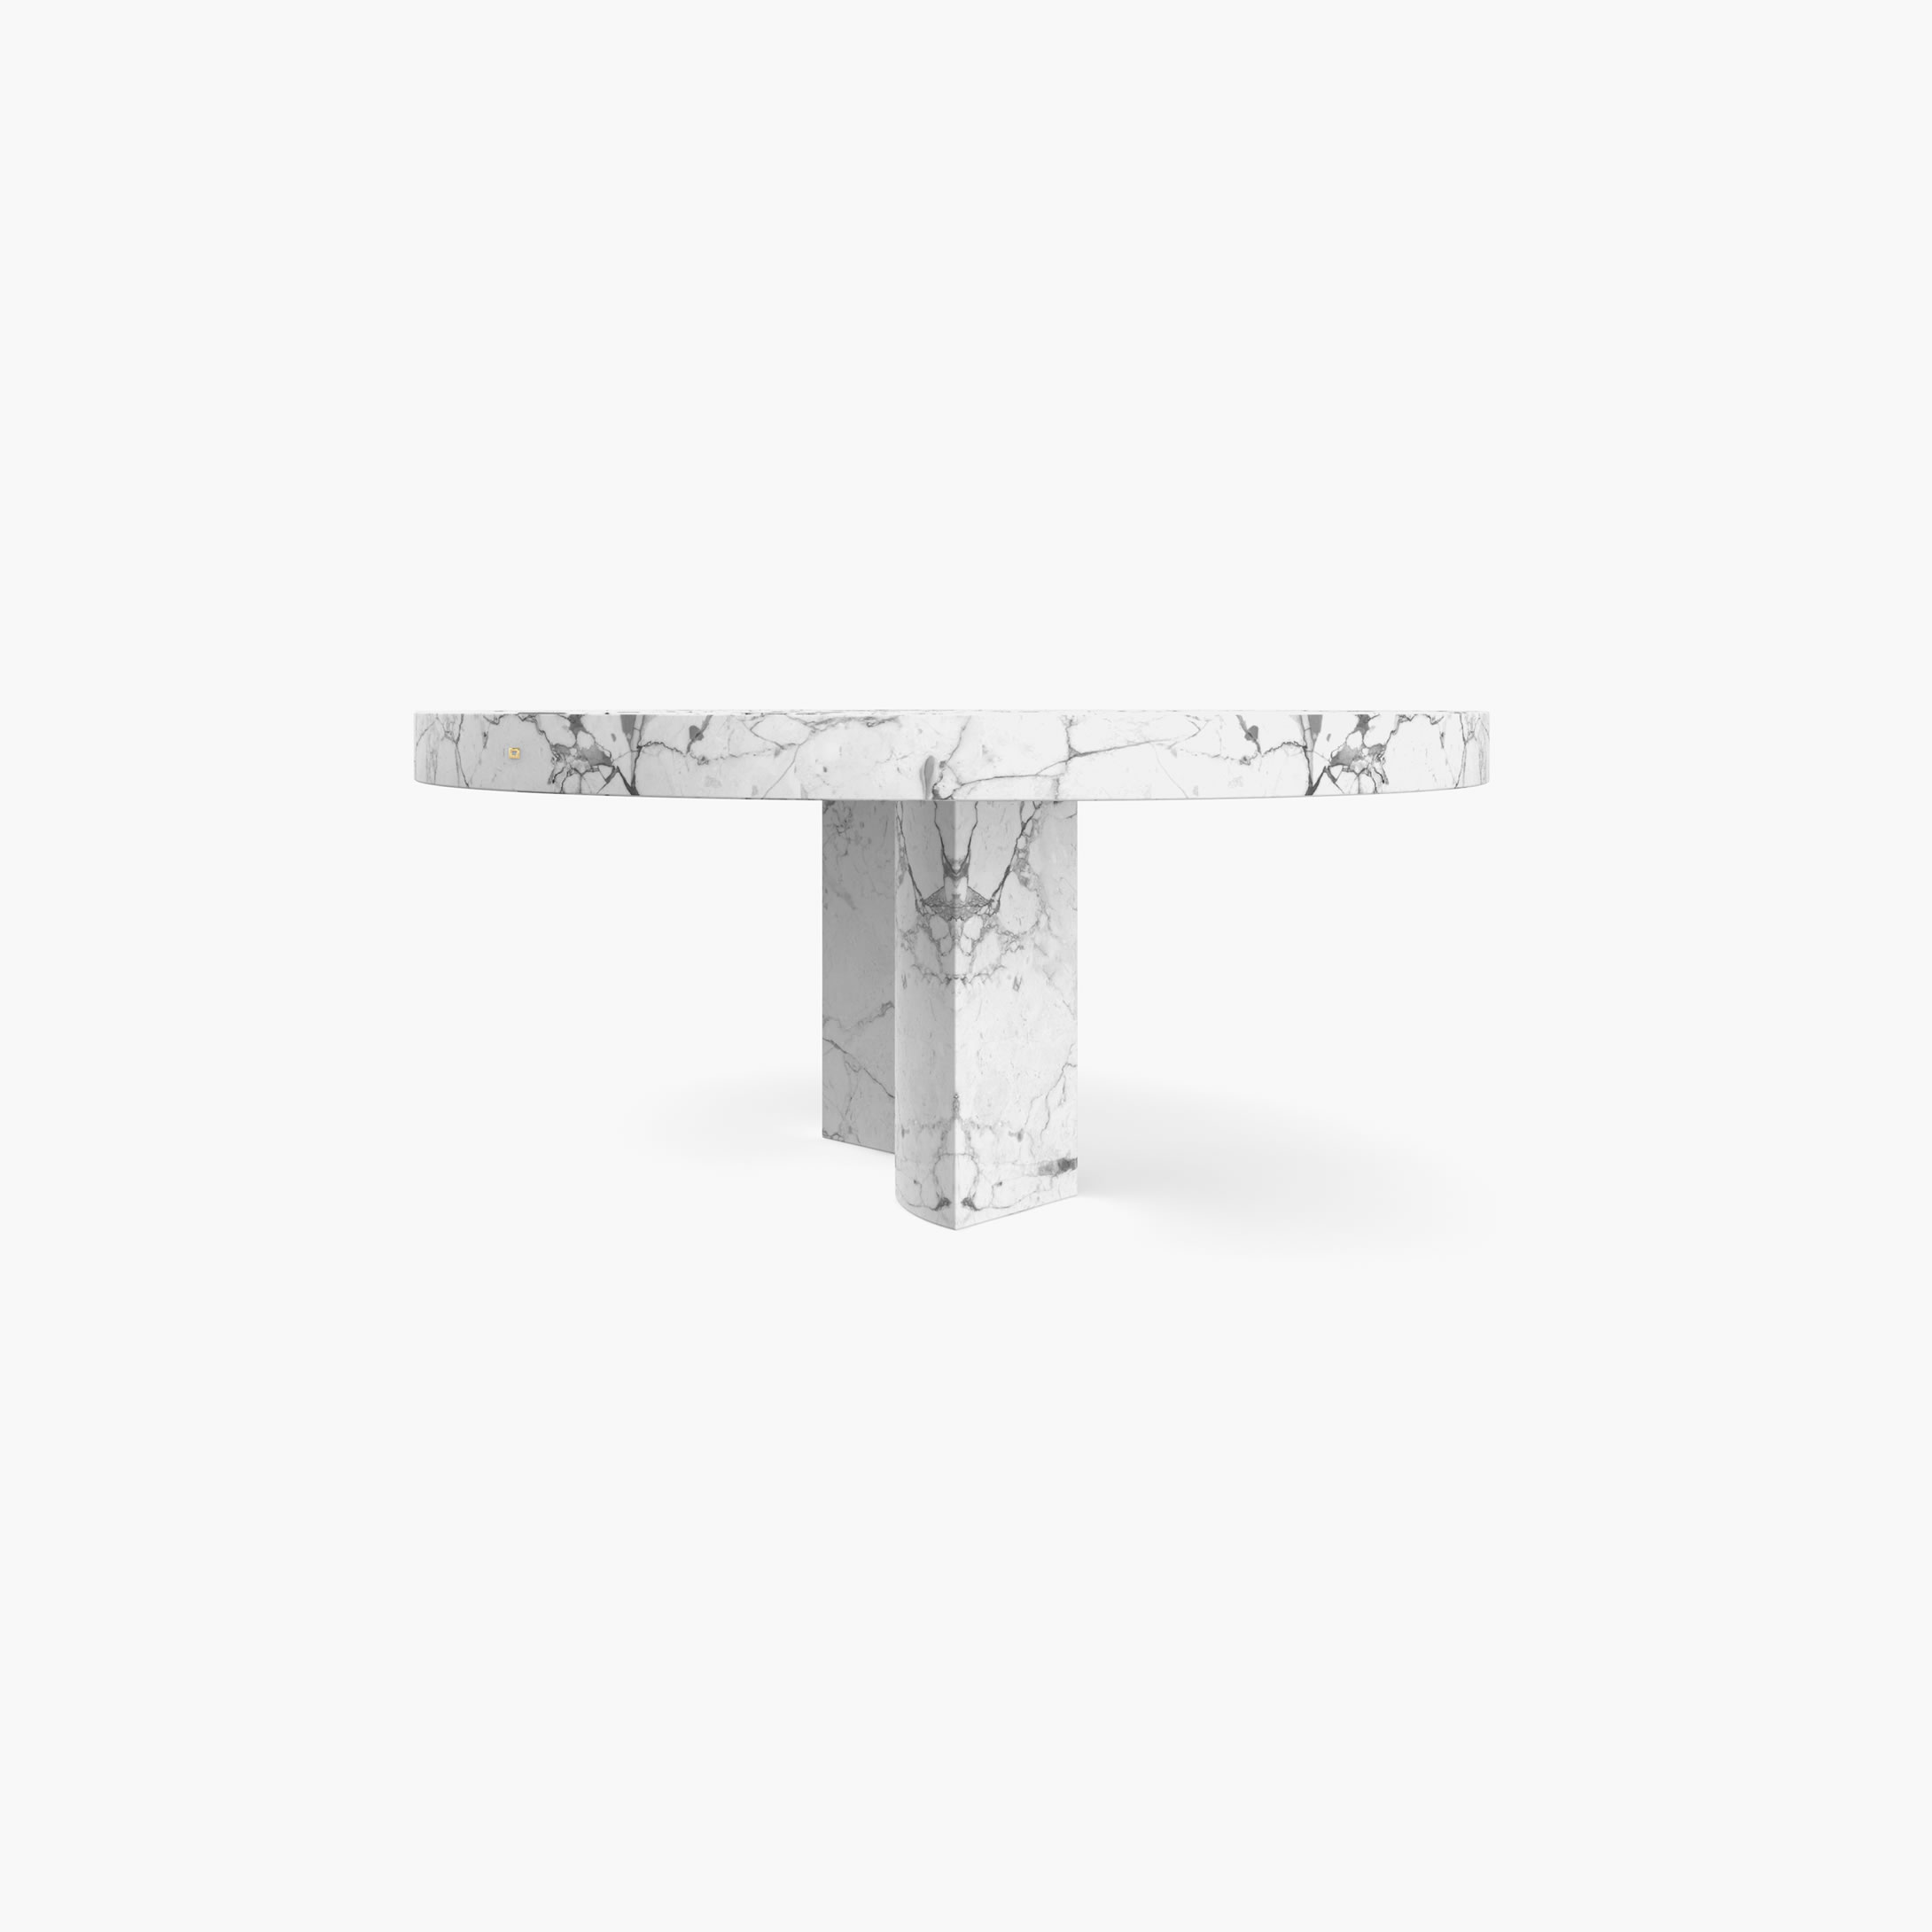 Dining Table round quarter cylinder segments legs White Arabescato Marble artistic Dining Room art works Dining Tables FS 194 A FELIX SCHWAKE